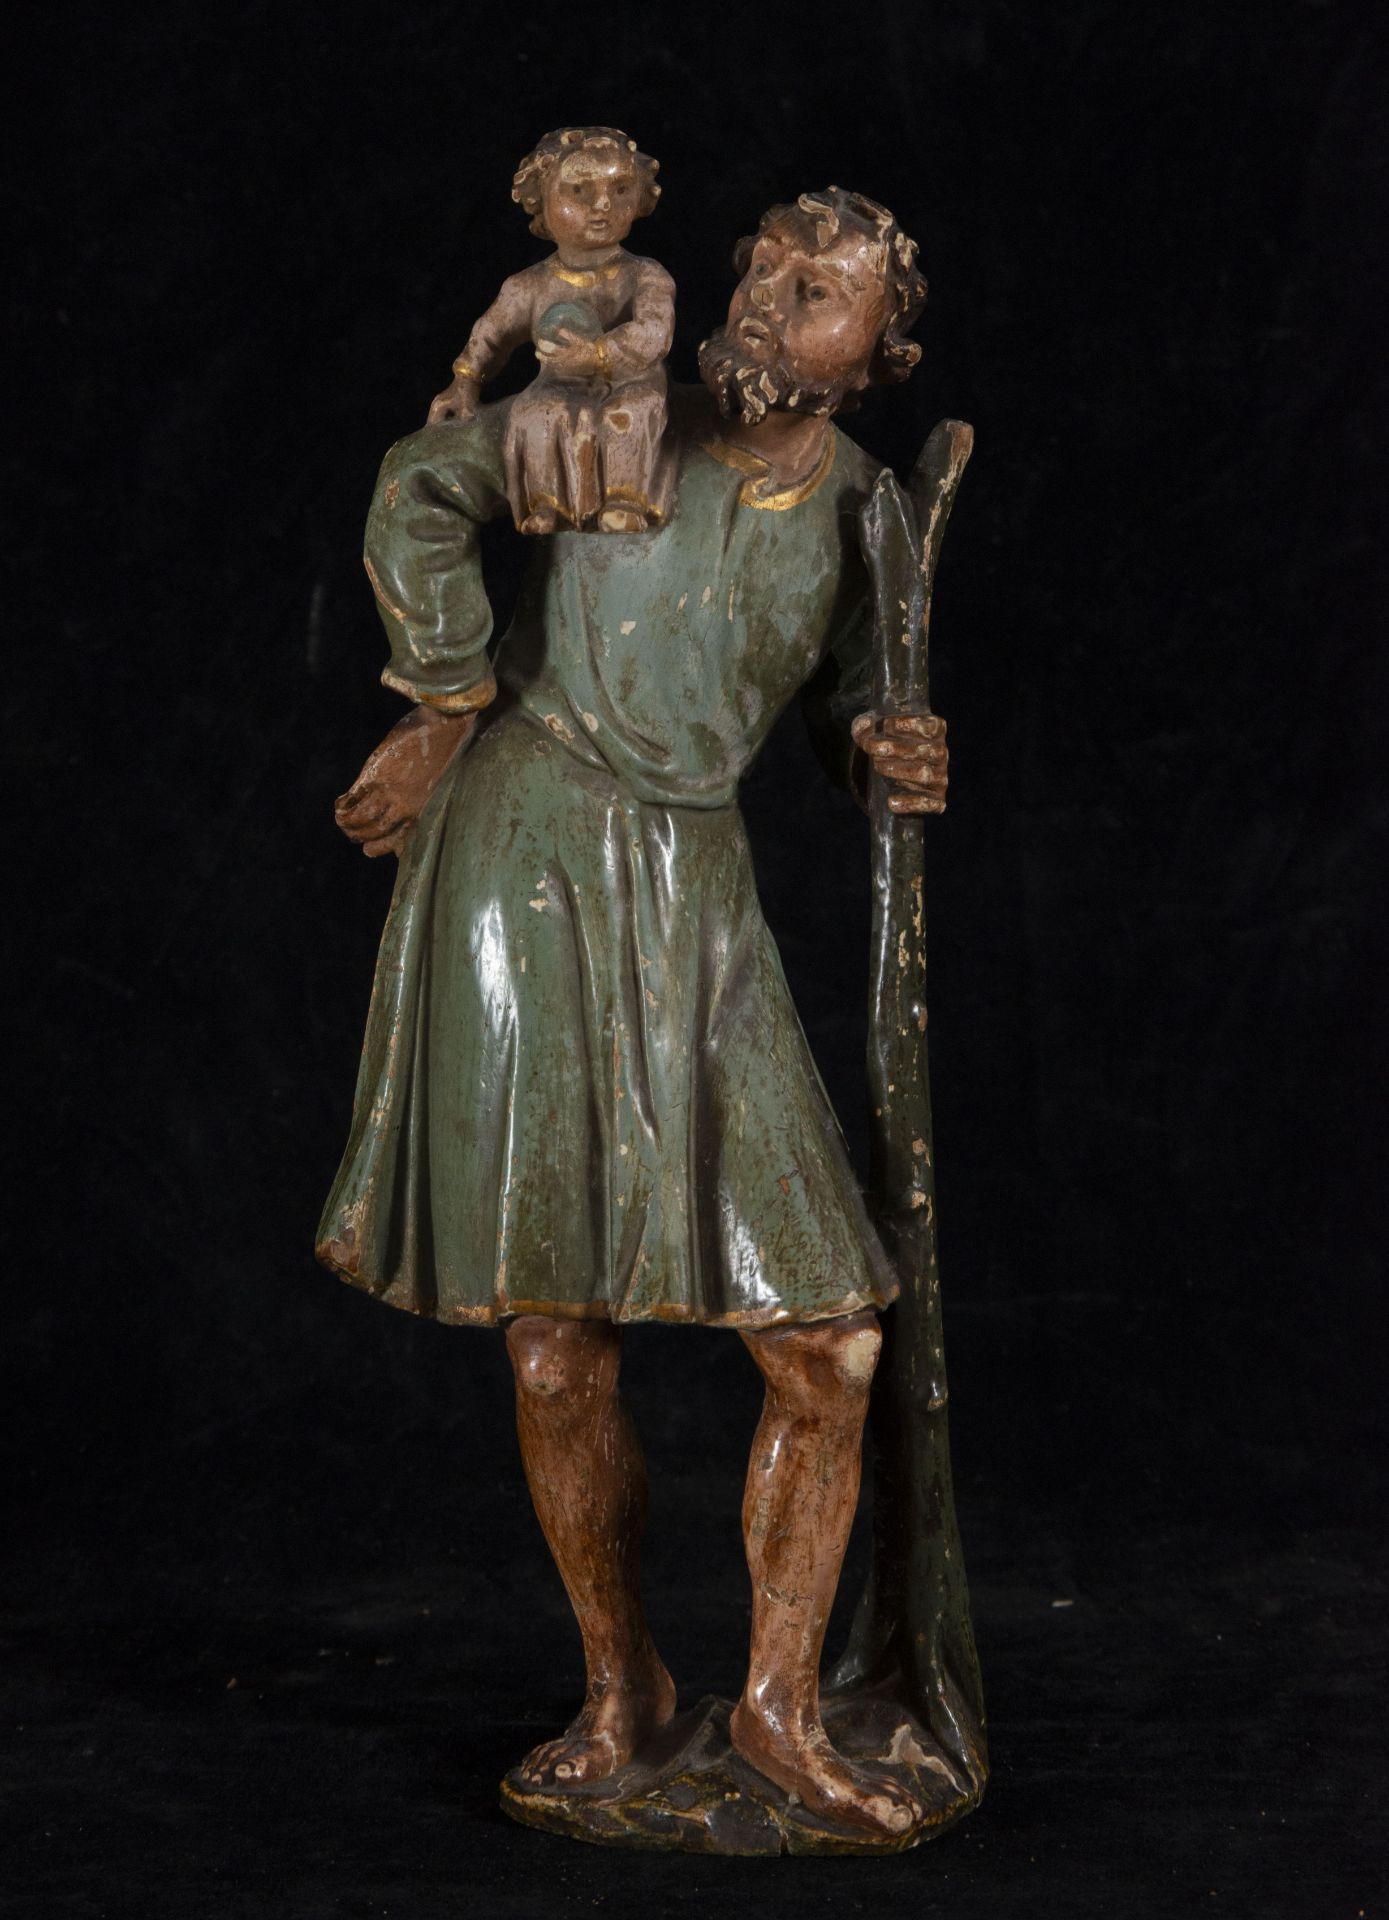 Saint Cristopher, Mexico, New Spain colonial work of the 17th century